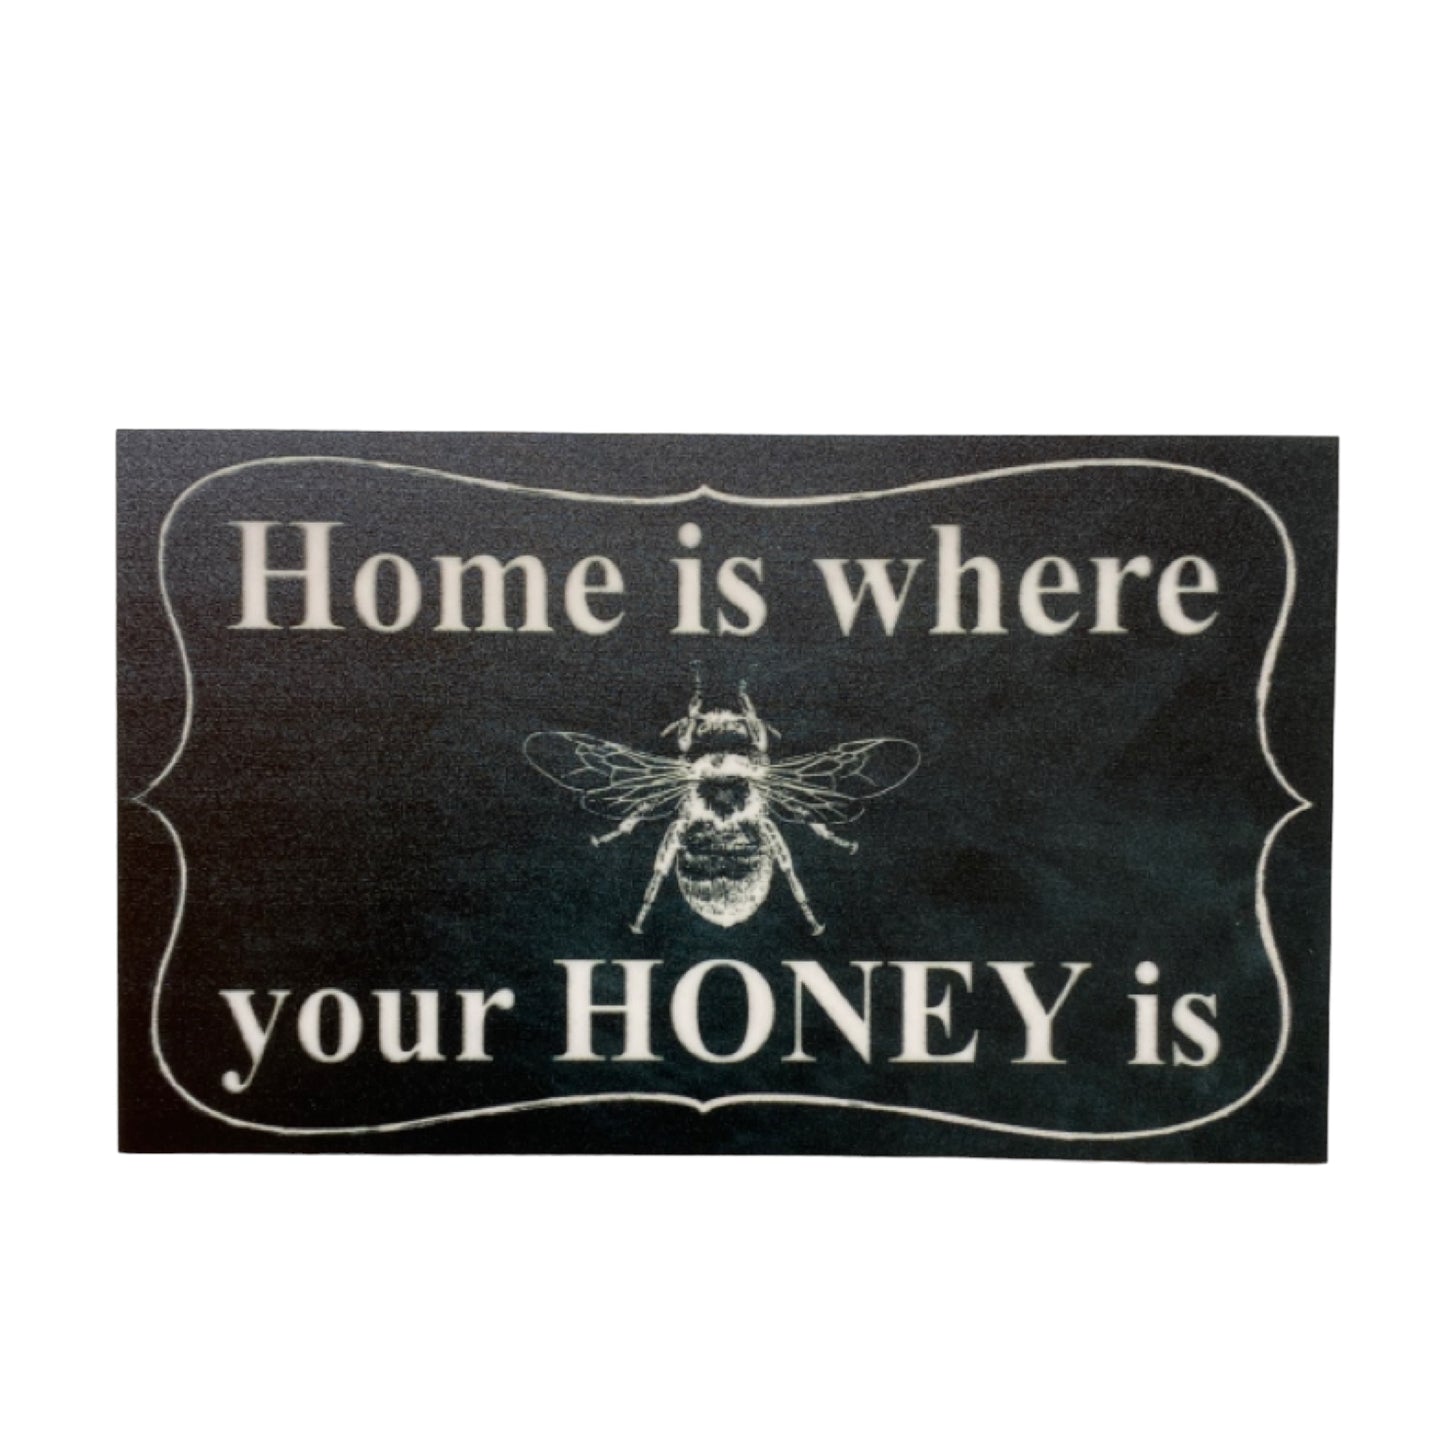 Home Where Your Honey Is Vintage Sign - The Renmy Store Homewares & Gifts 